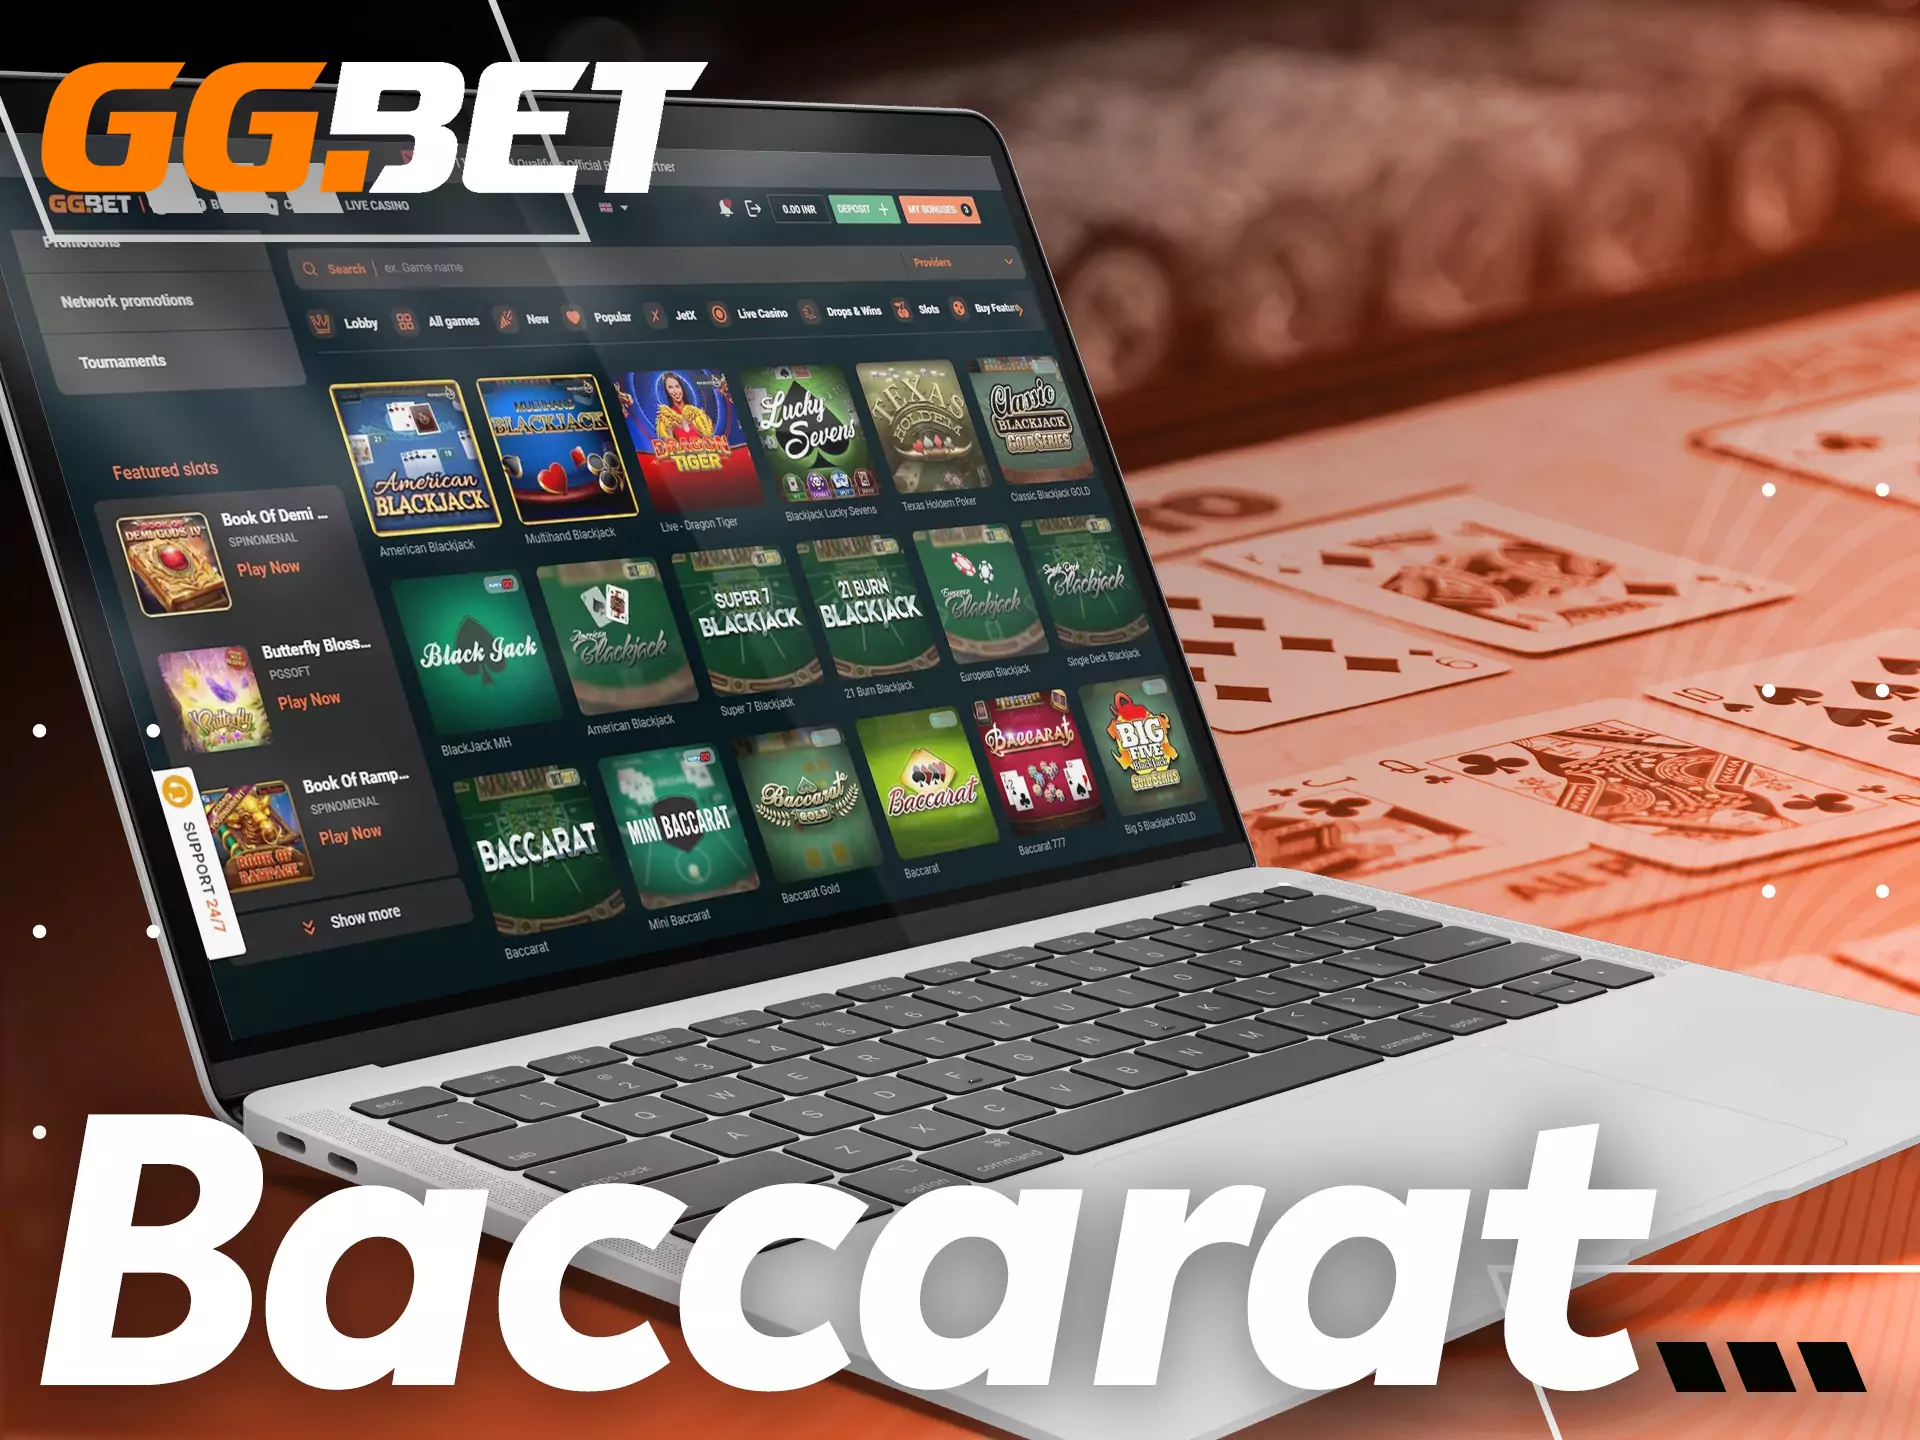 On GGBet, you can play baccarat both in online and in live casino.